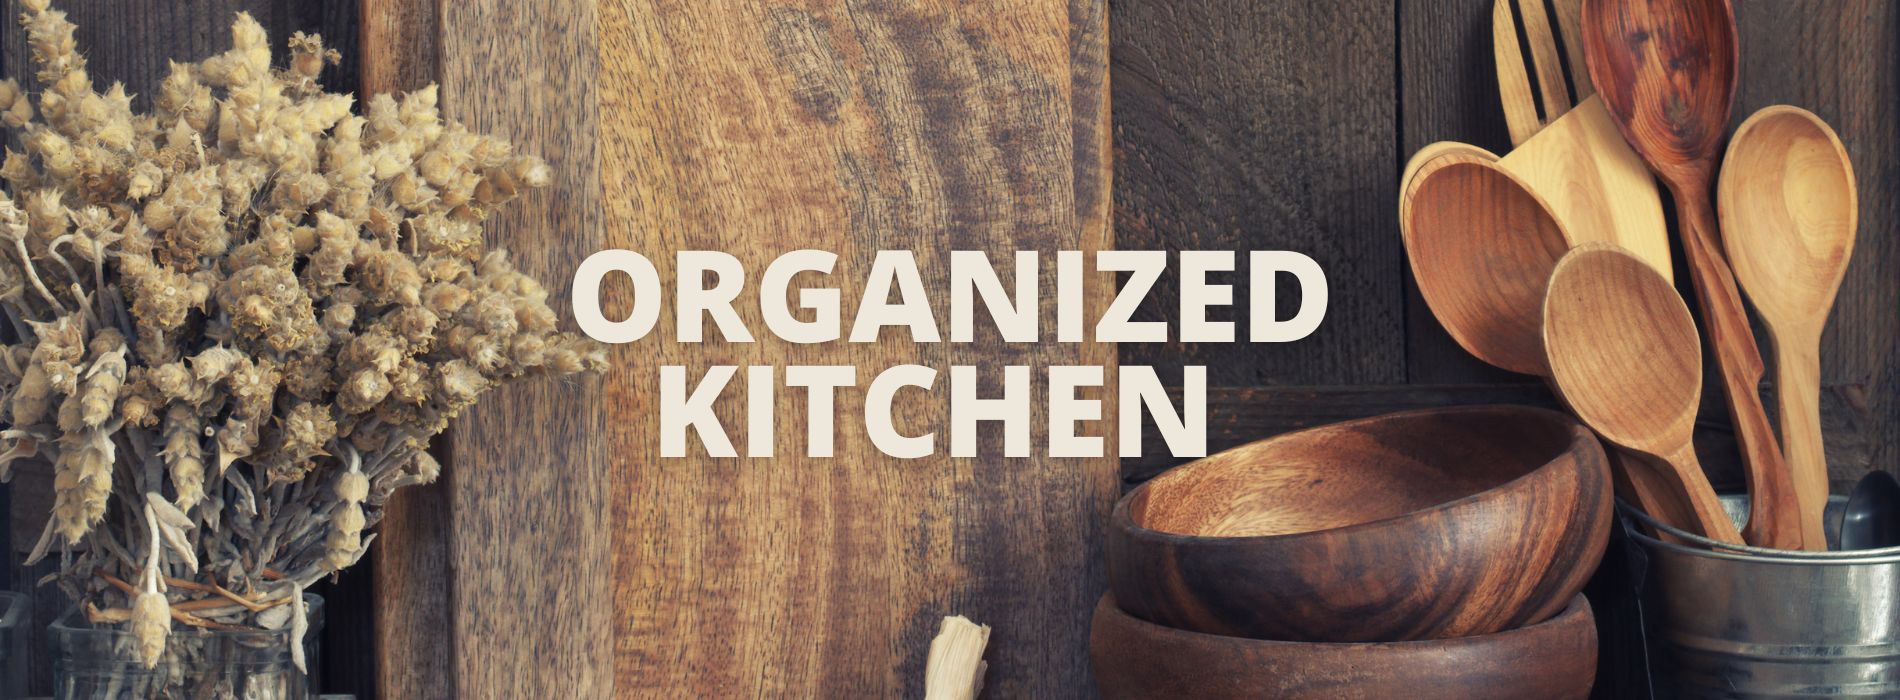 Kitchen Organizers - The Secret to a More Functional Kitchen